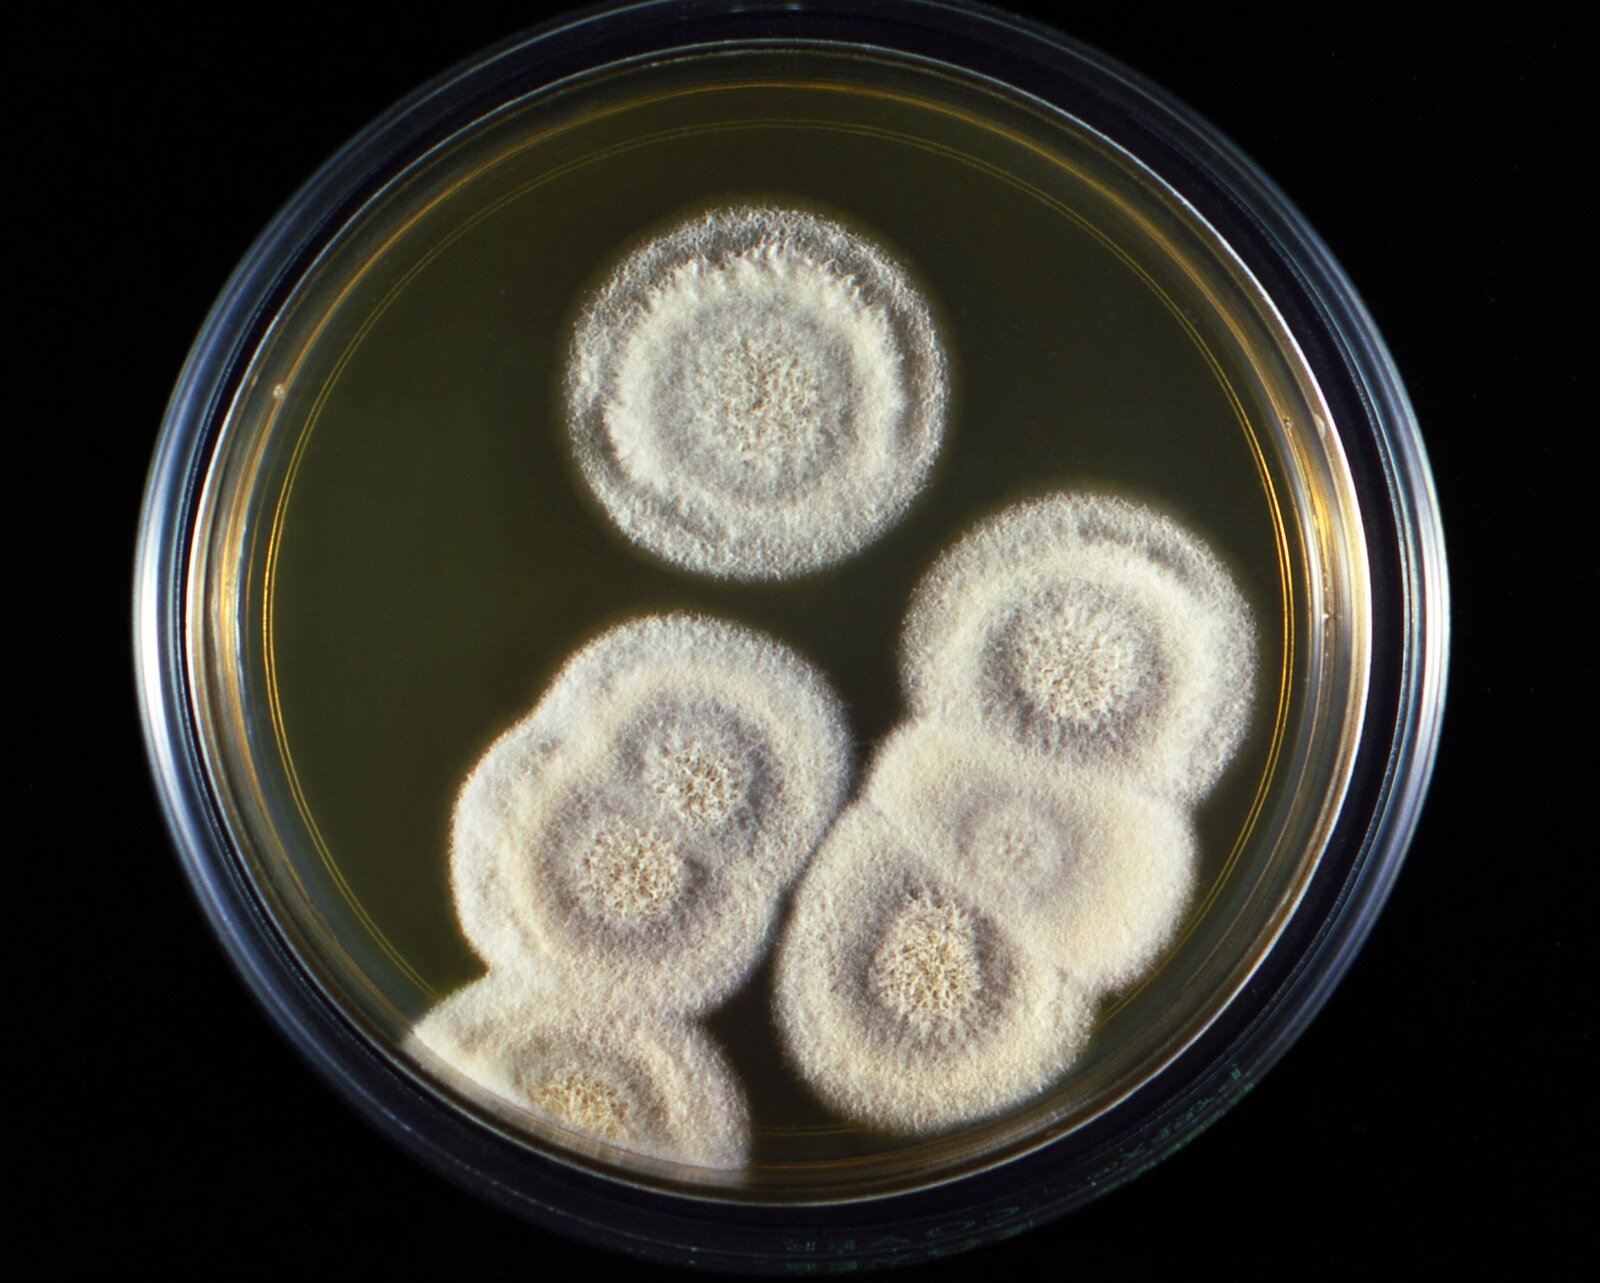 An agar plate with fuzzy circles of Valley Fever (Coccidioides immitis) fungus growing.